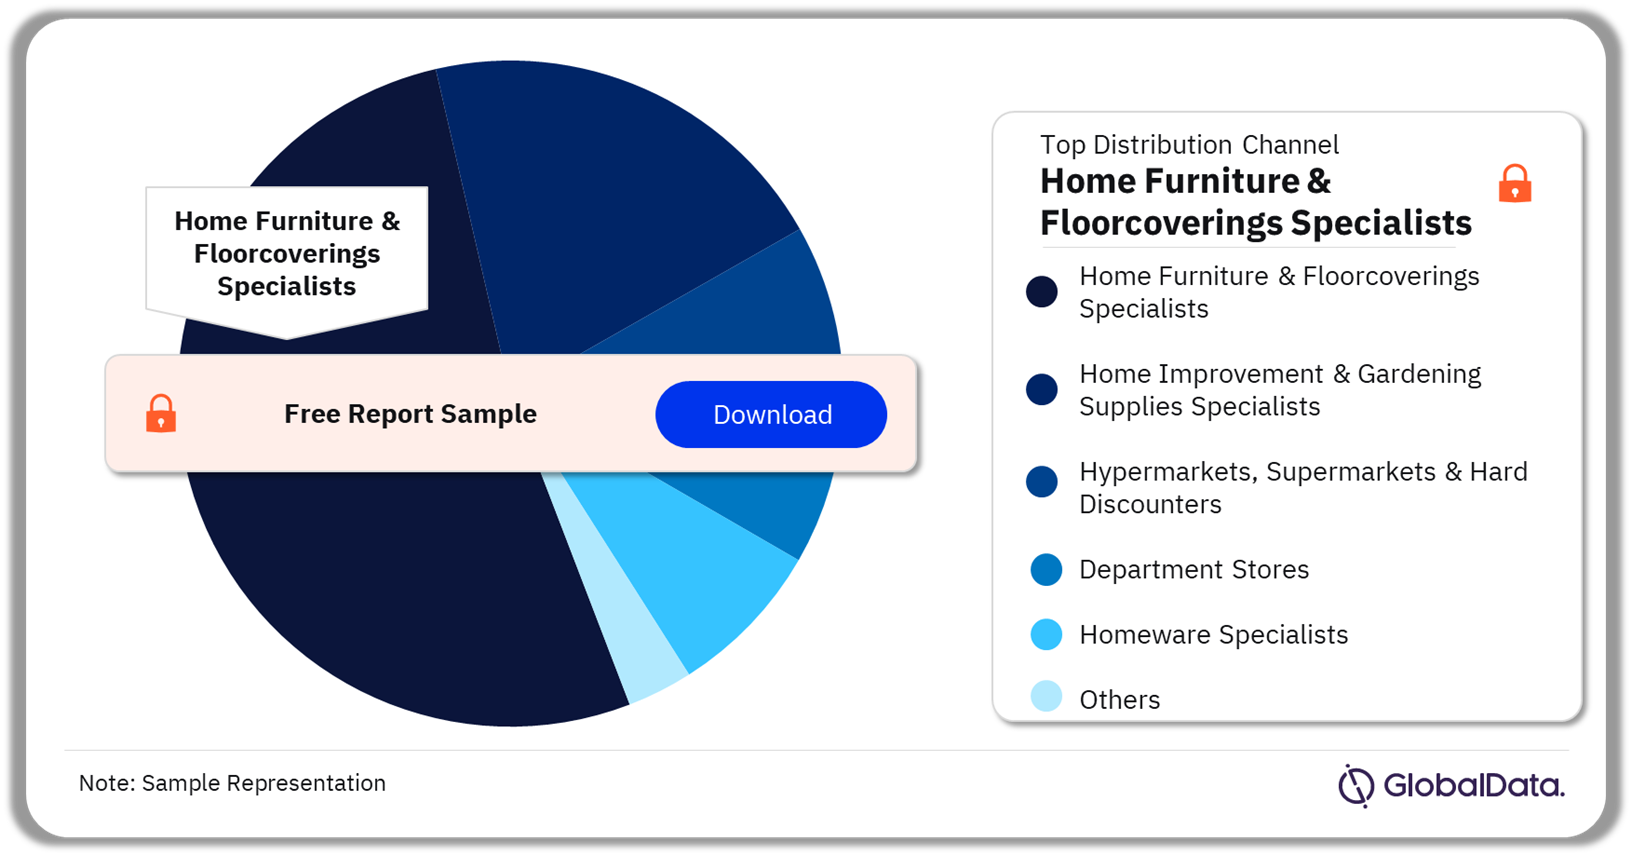 MEA Home and Garden Retail Market Analysis by Channels, 2022 (%)